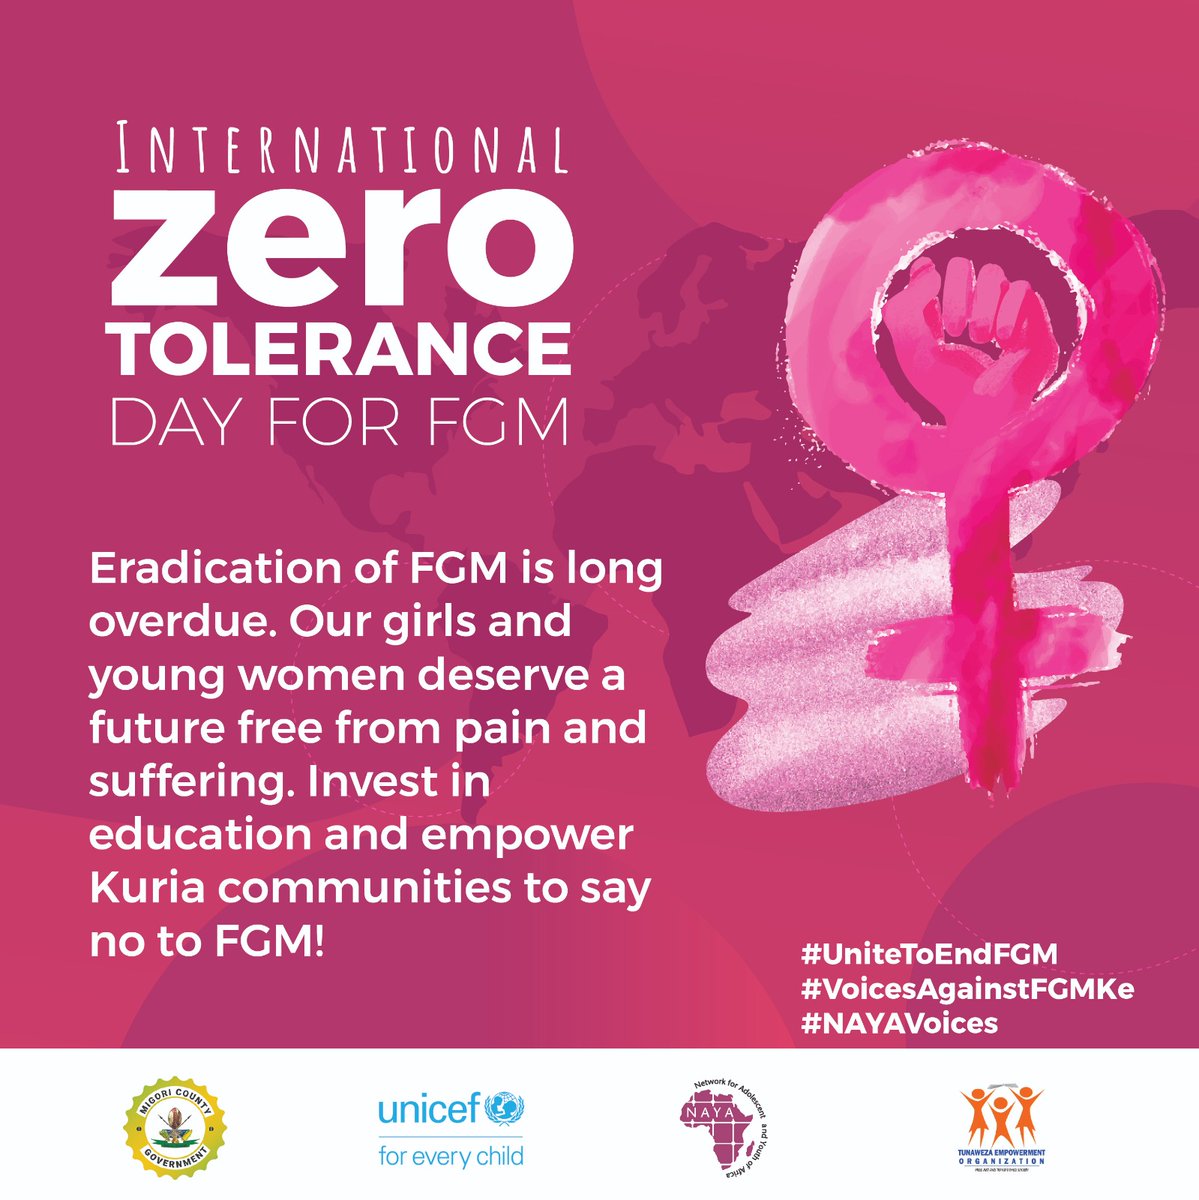 The scars of FGM last a lifetime.Its time to join hands  and stop this cycle of pain and injustice to our girls.KUrian Community together we can.#UnitedToEndFGM #voicesagainstFGMke #Nayavoices